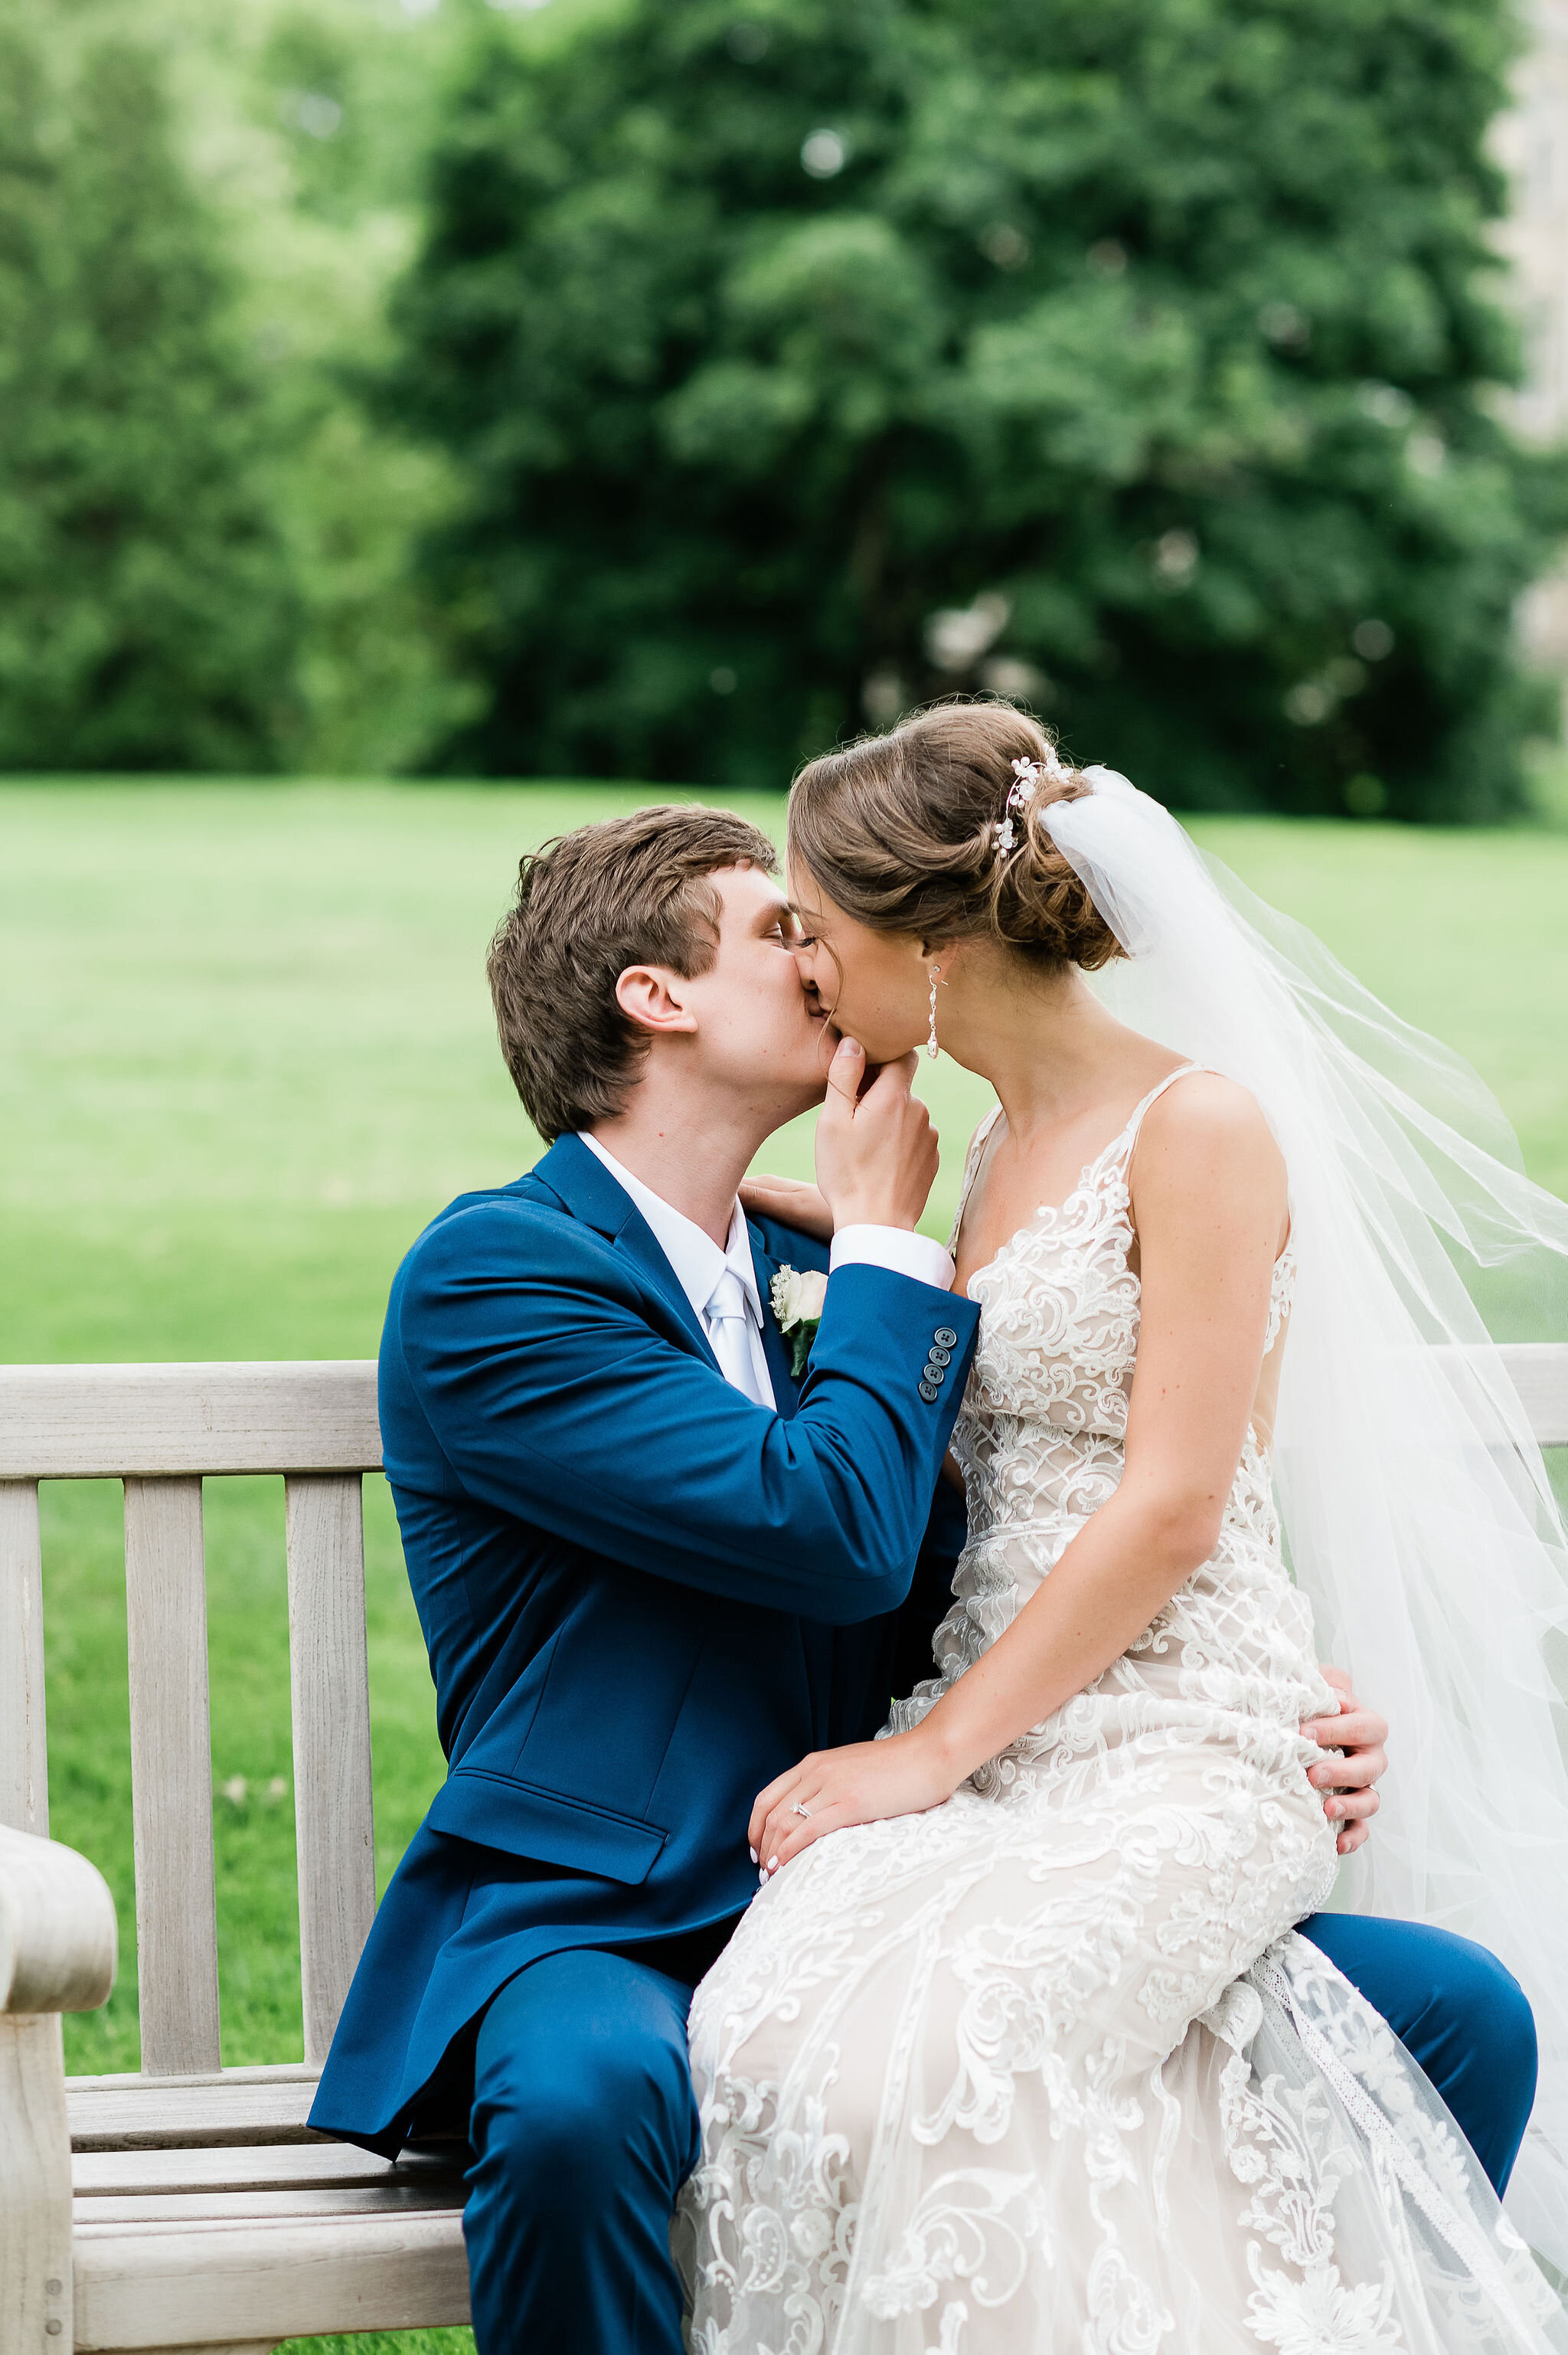 Bride and groom kissing on a bench